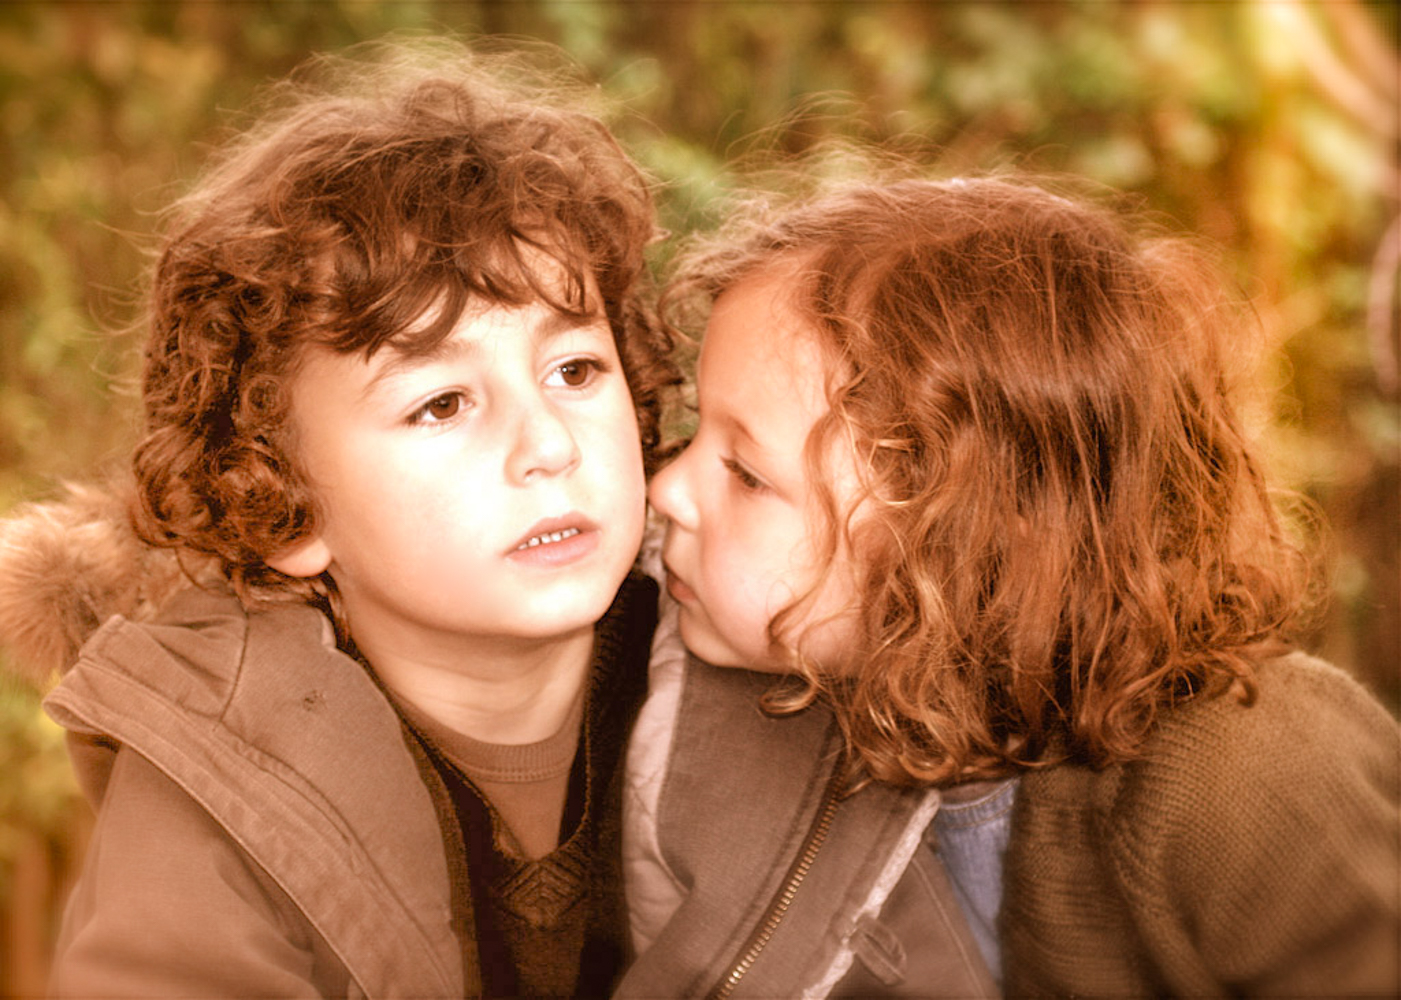 sister giving her brother a kiss on the cheek